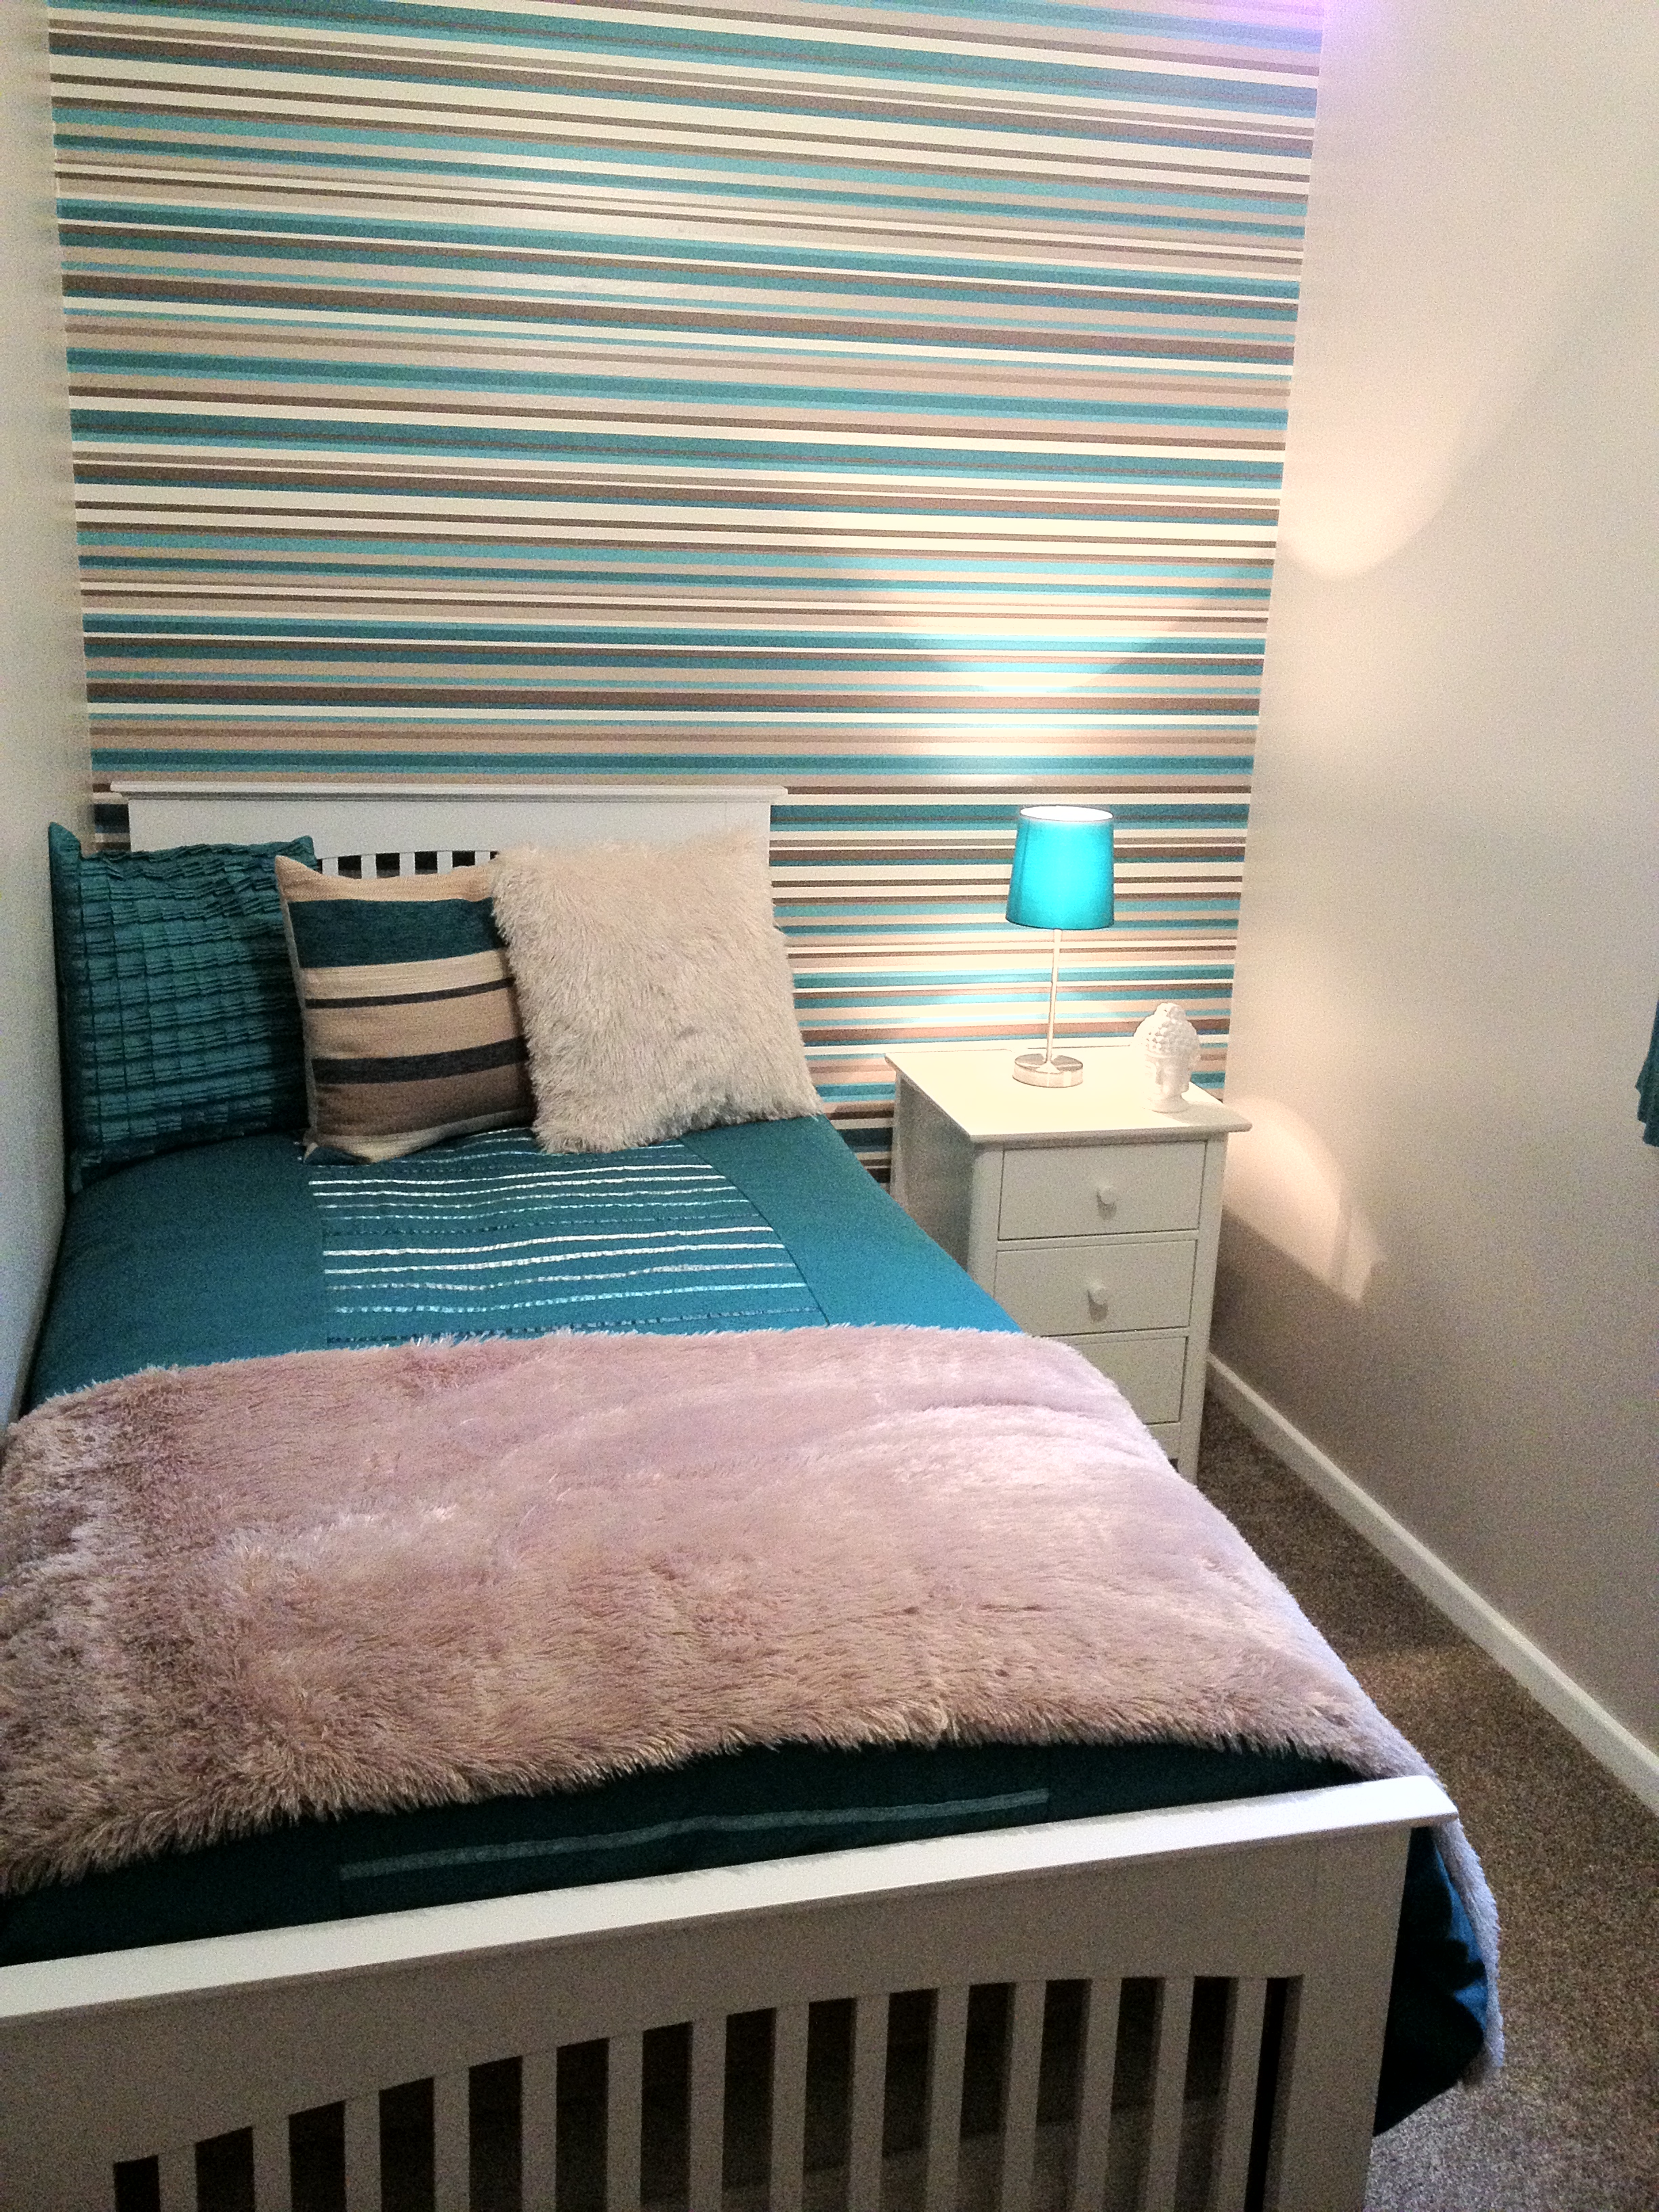 Teal And Pink Bedroom